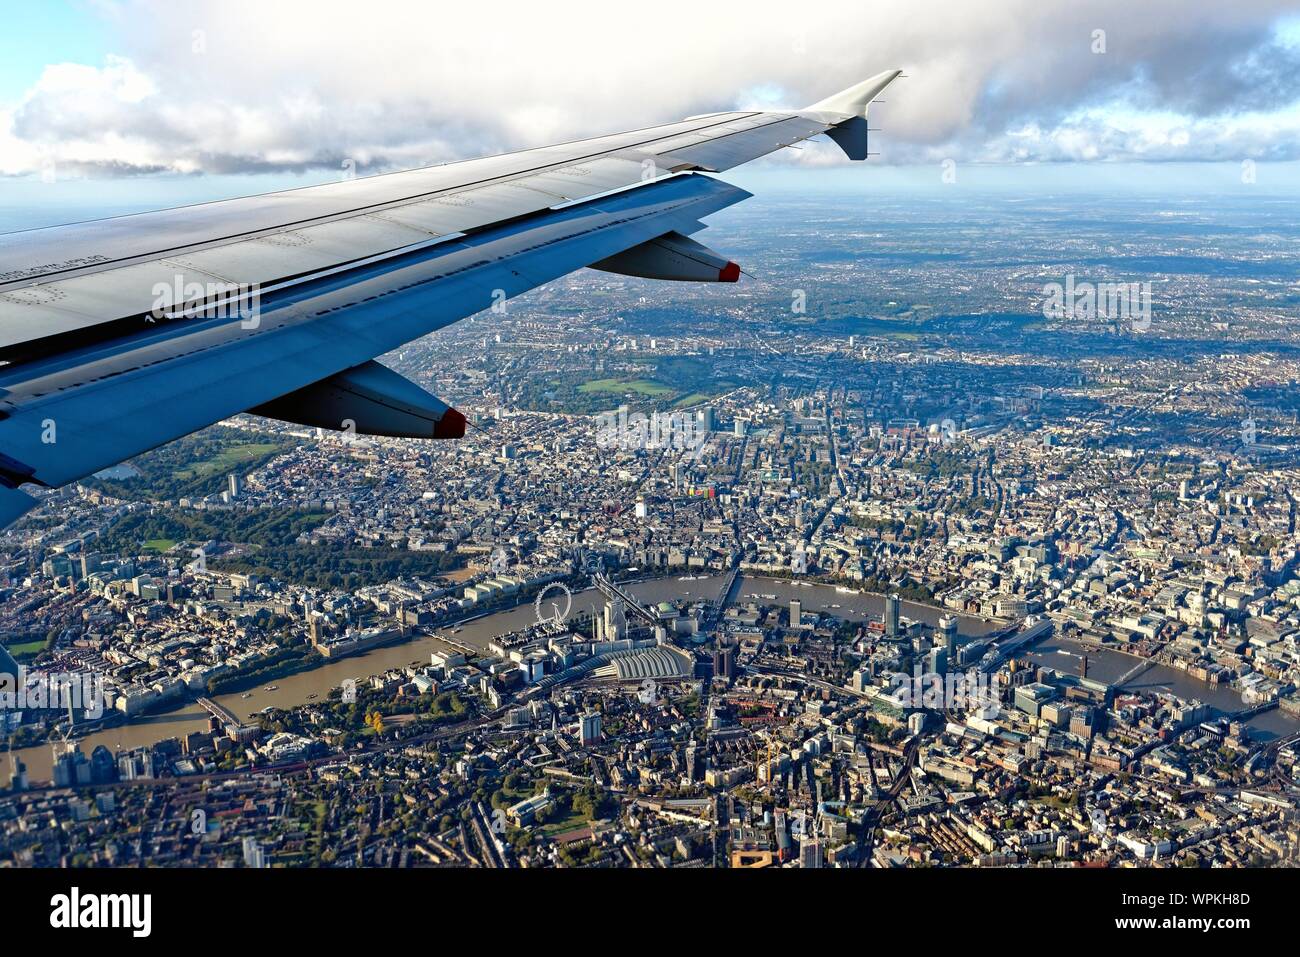 An aerial  view of central London as seen from a passenger jet plane on a flight path to Heathrow airport , England UK Stock Photo